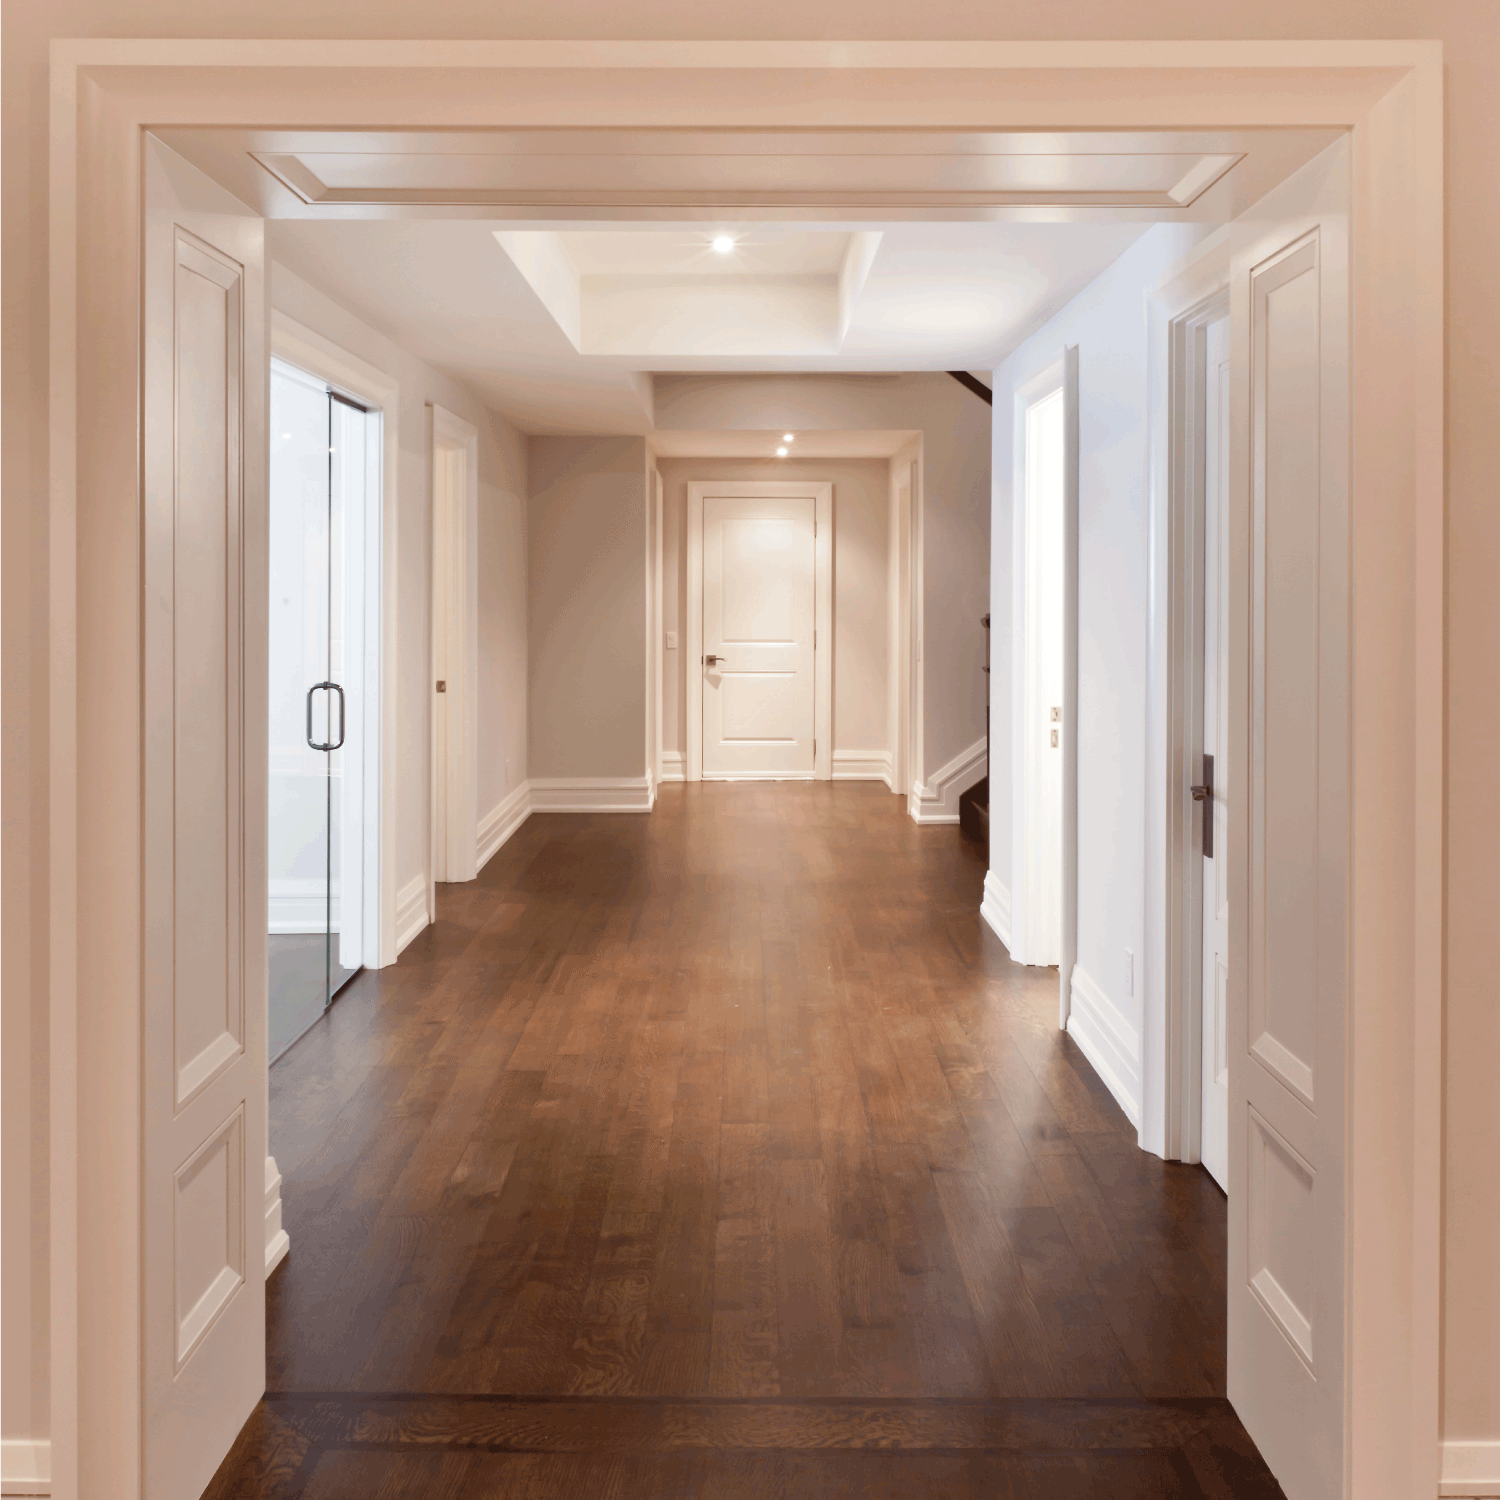 house hallway with wood floor and doors. Highlighting The Threshold